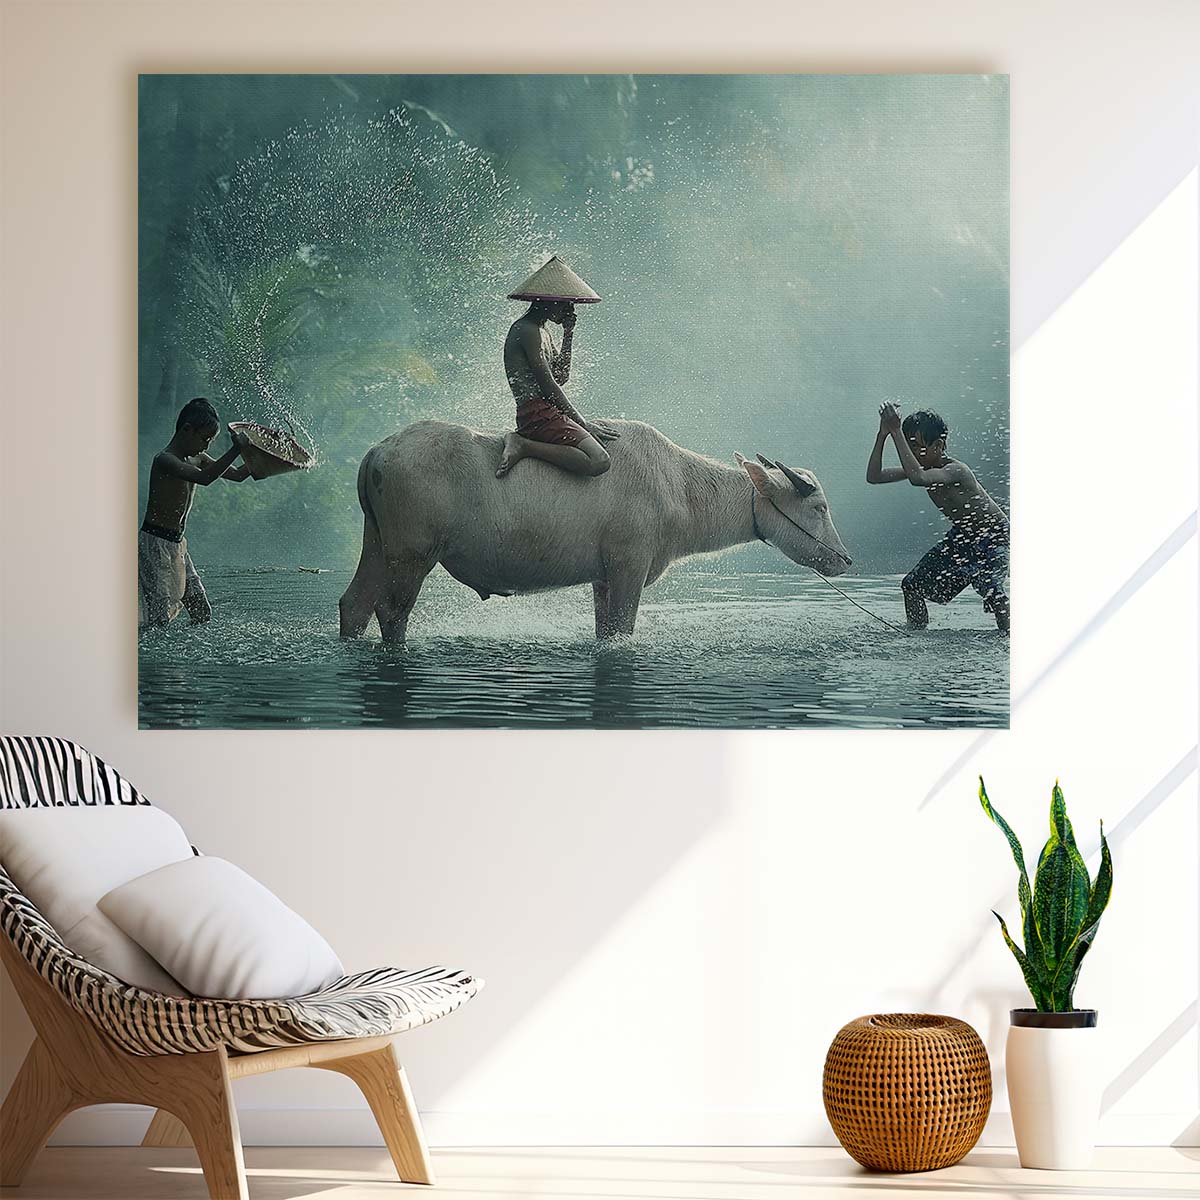 Indonesian Water Buffalo Playtime River Scene Wall Art by Luxuriance Designs. Made in USA.